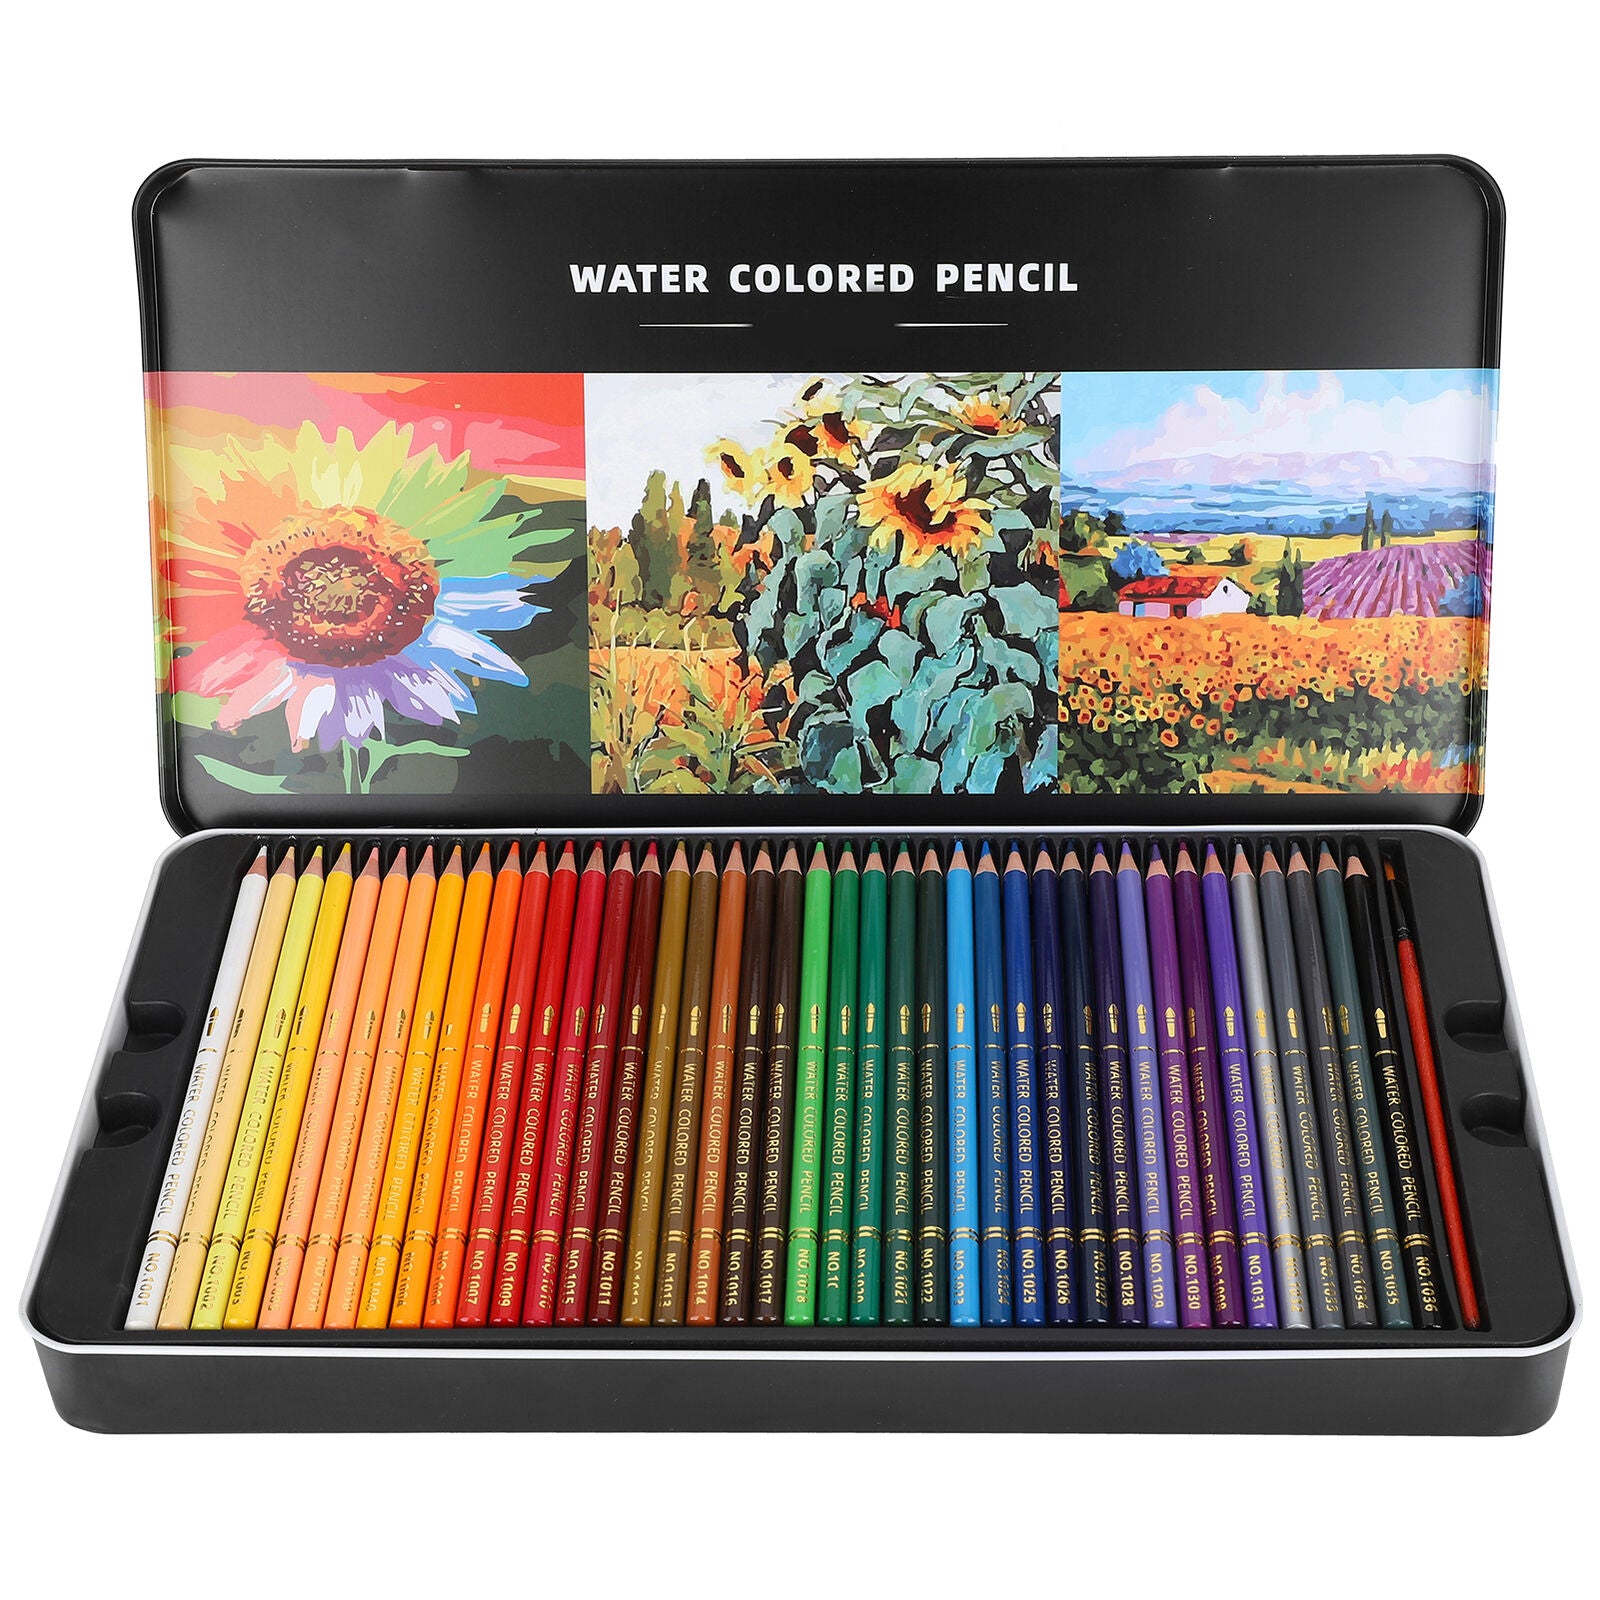 120 Colors Professional Watercolor Colored Drawing Pencils Gift Set with Box